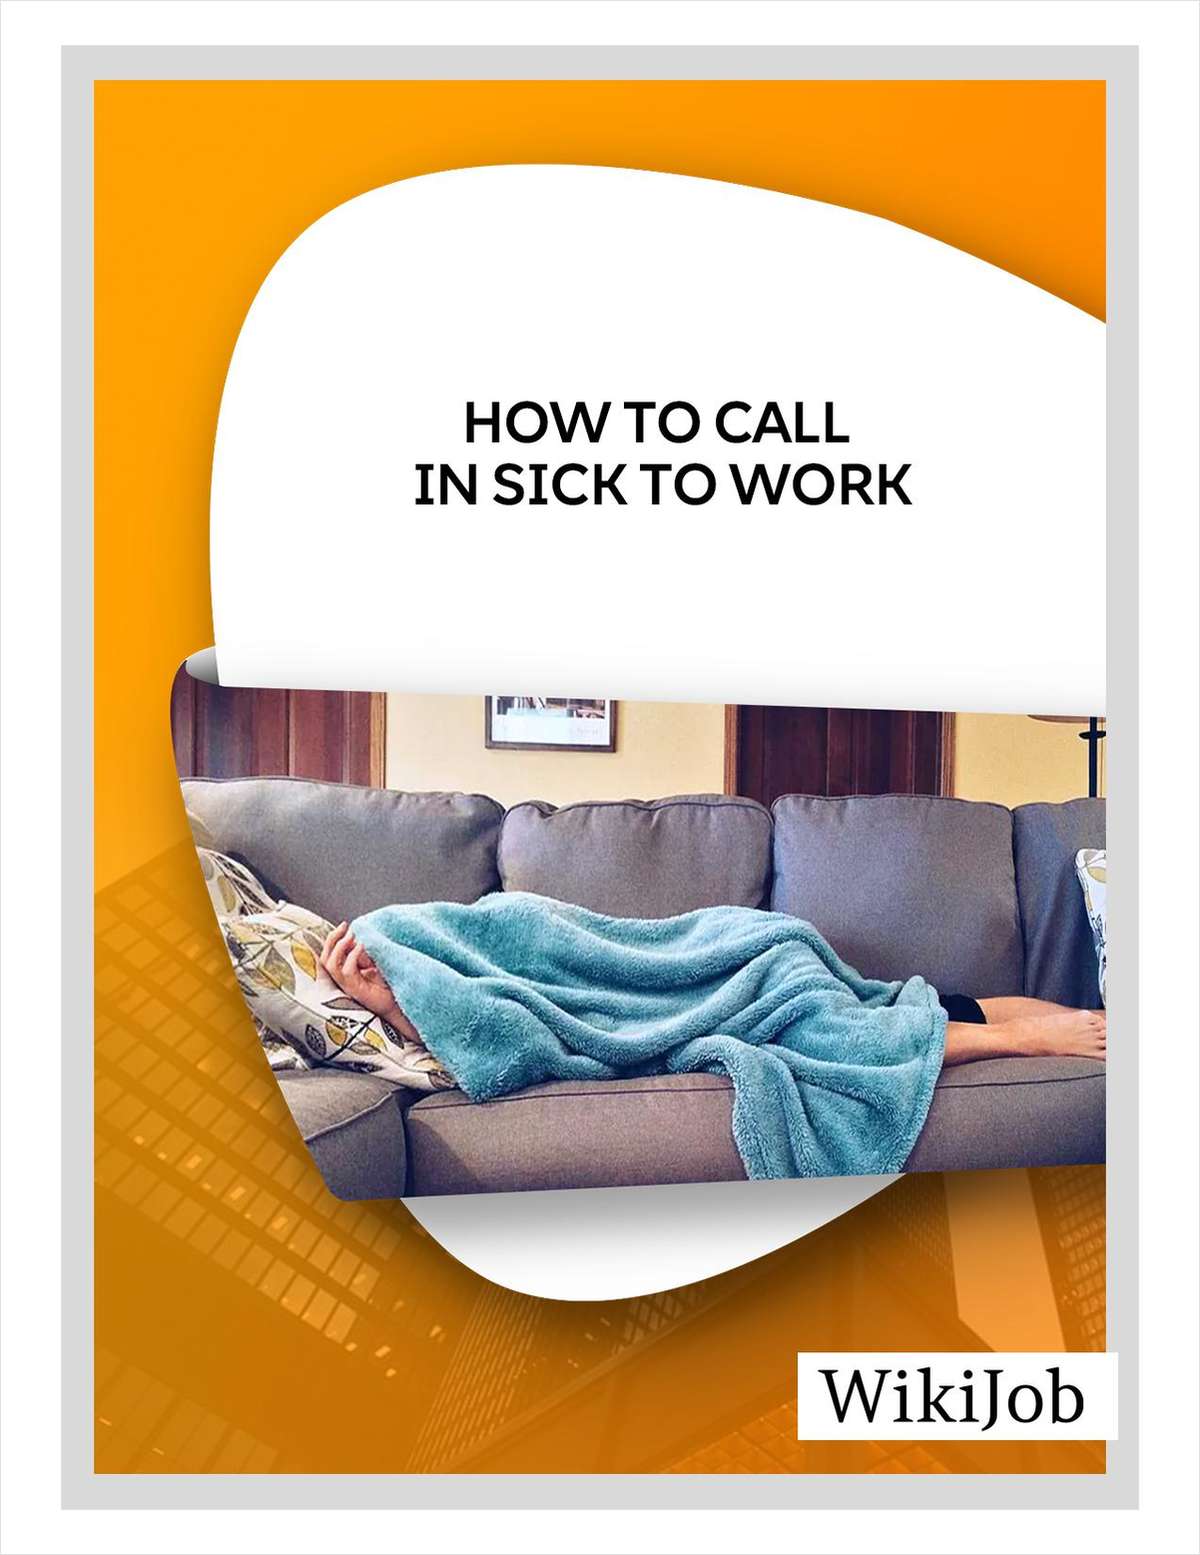 How to Call in Sick to Work